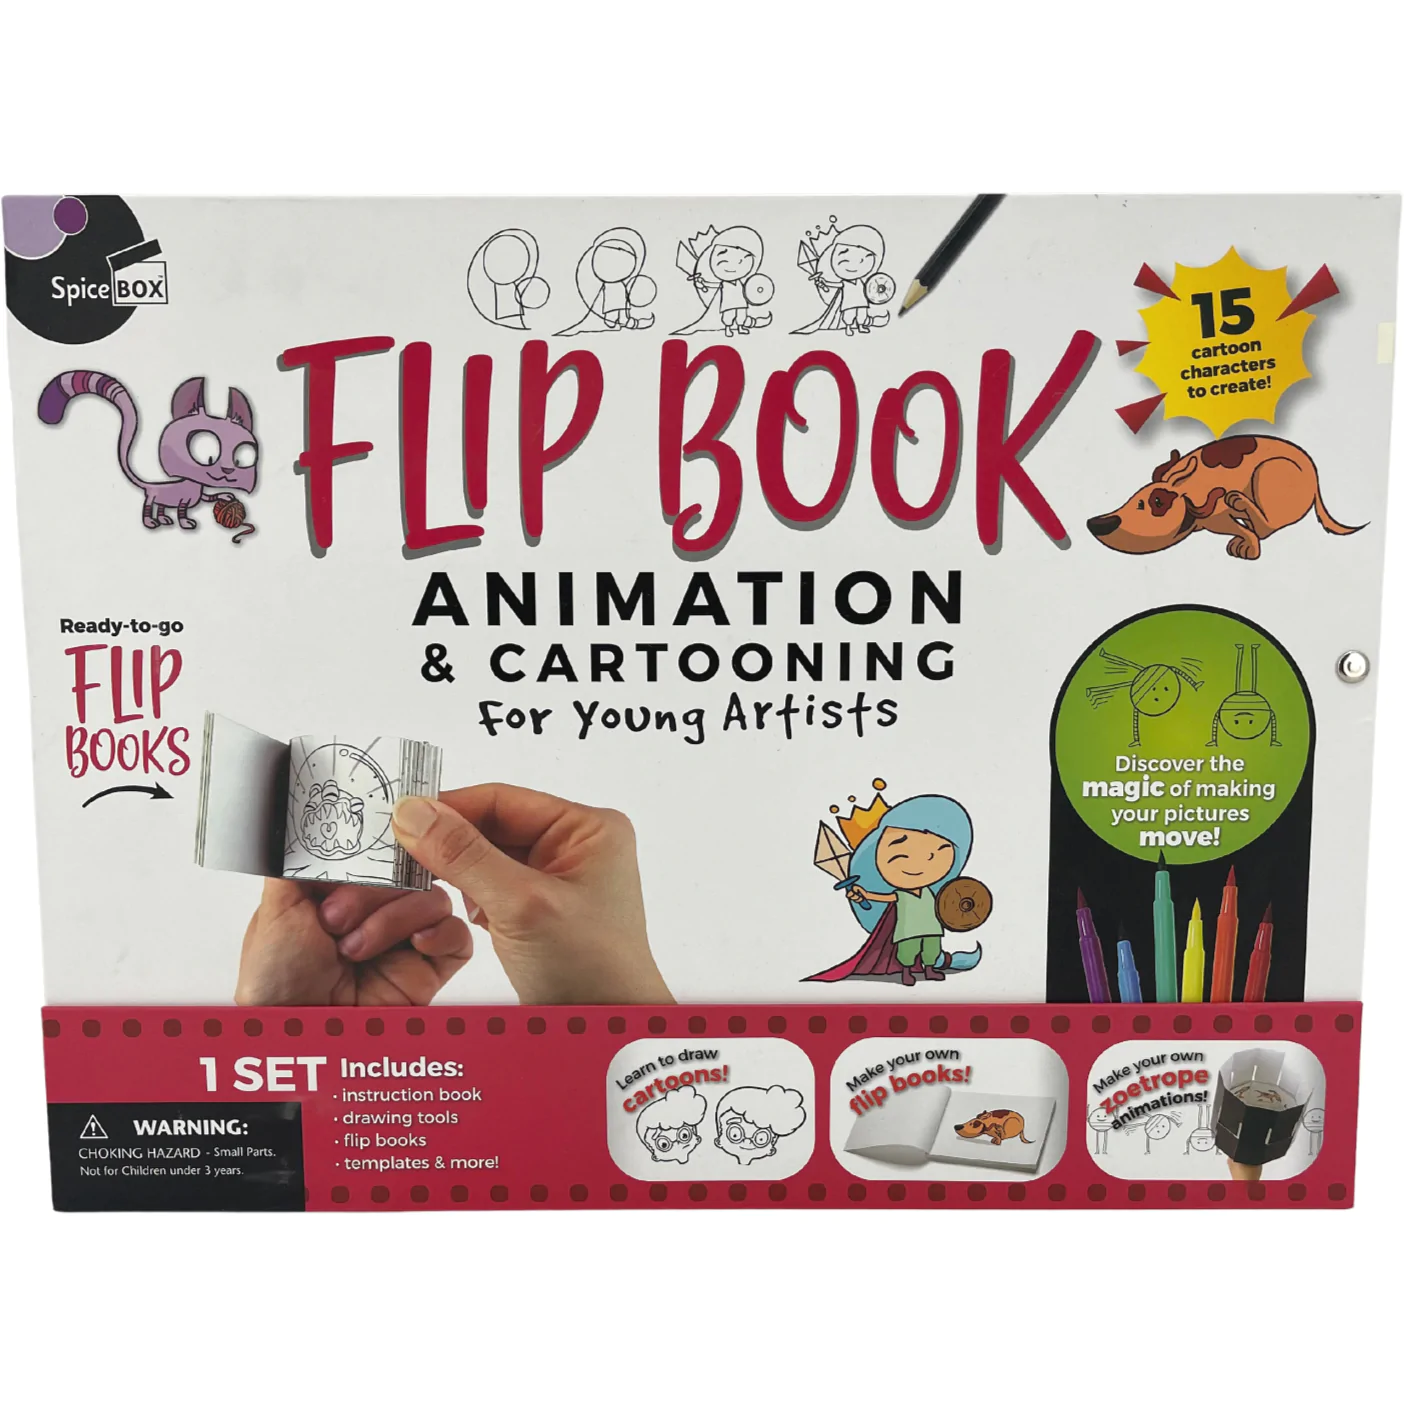 SpiceBox Flip Book Kit / Animation & Cartooning For Young Artists / Craft Kit